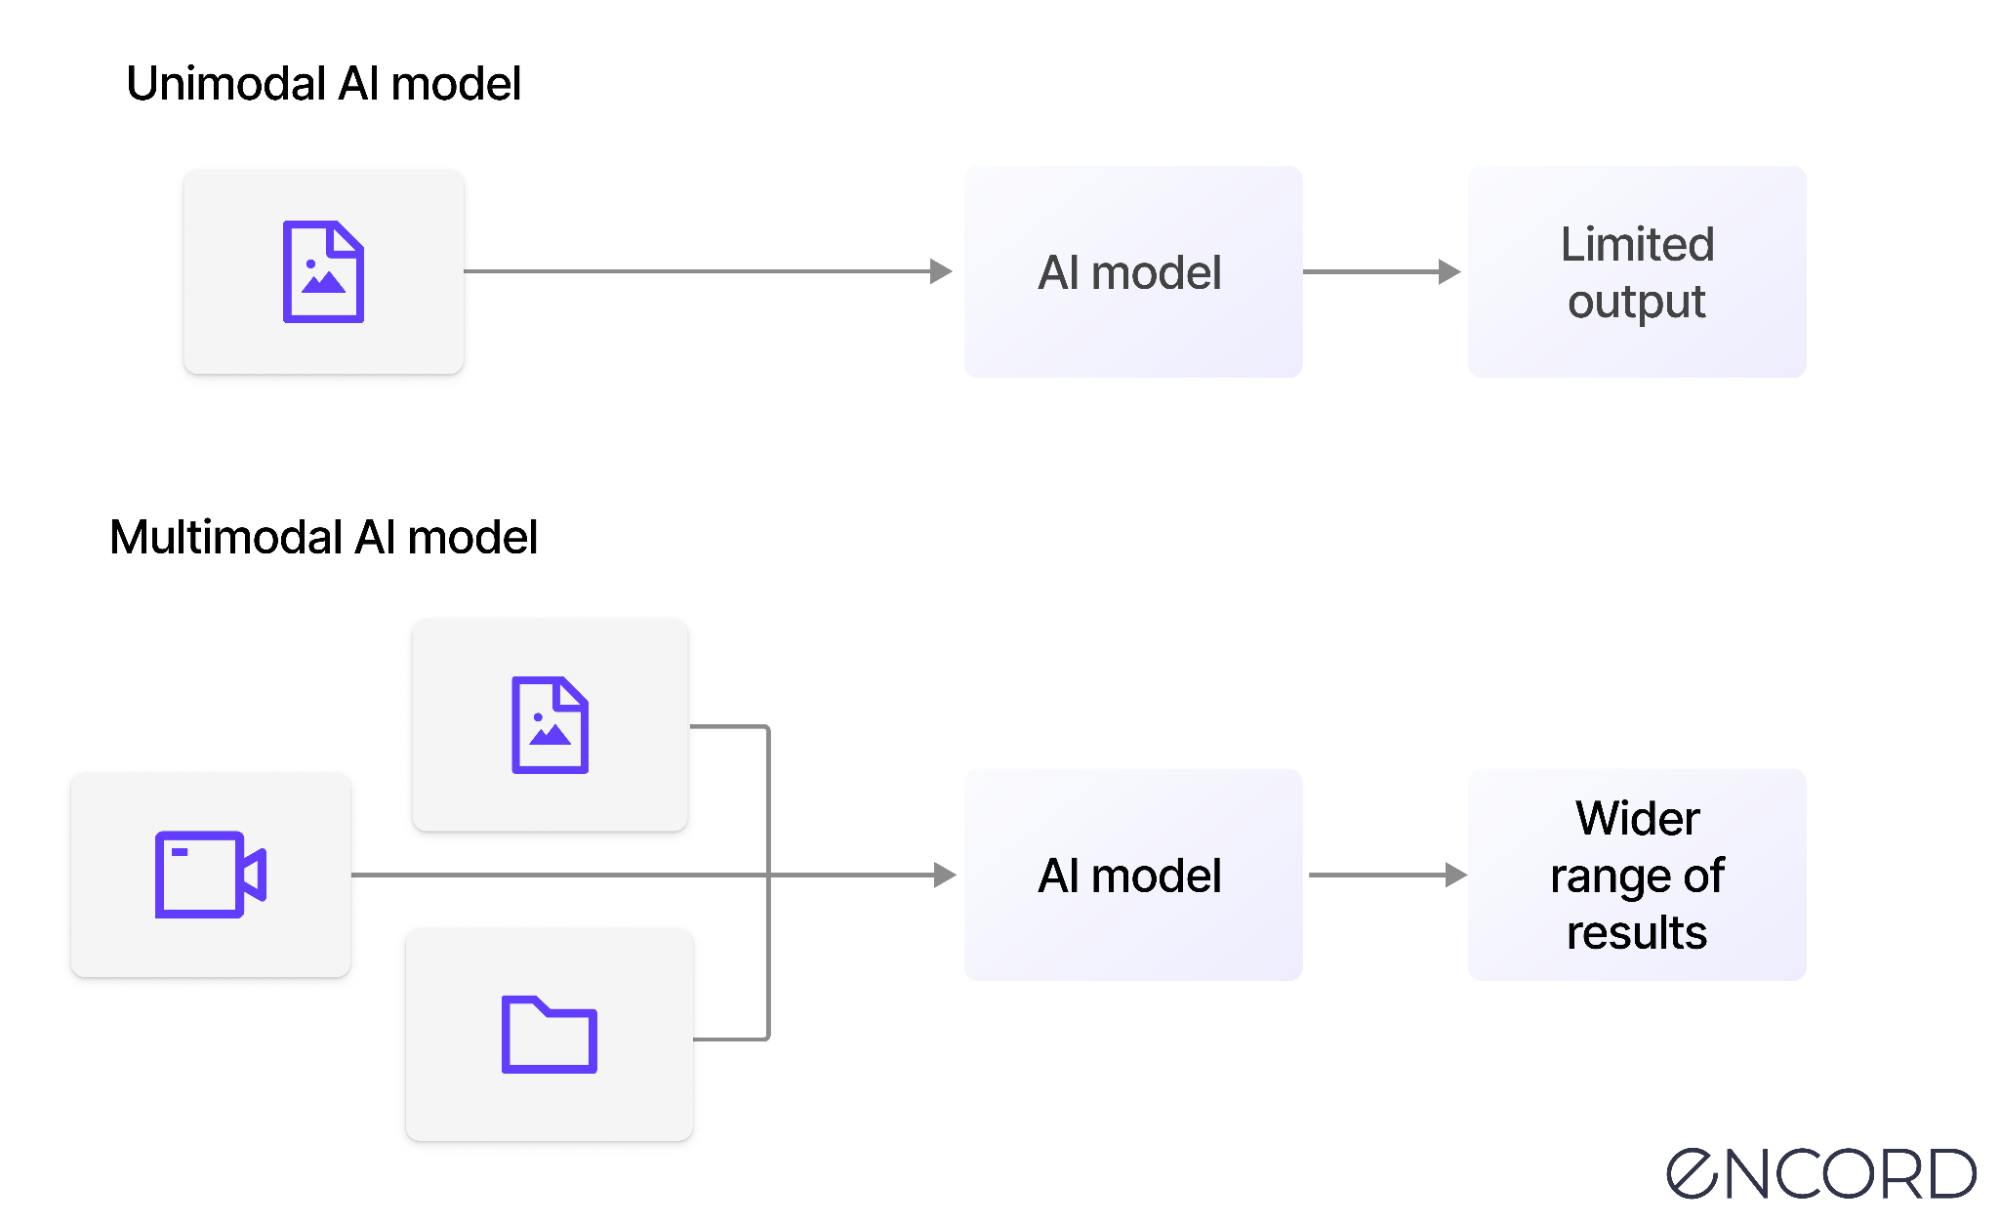 Graphic showing a comparison between unimodal AI models and multimodal AI models.